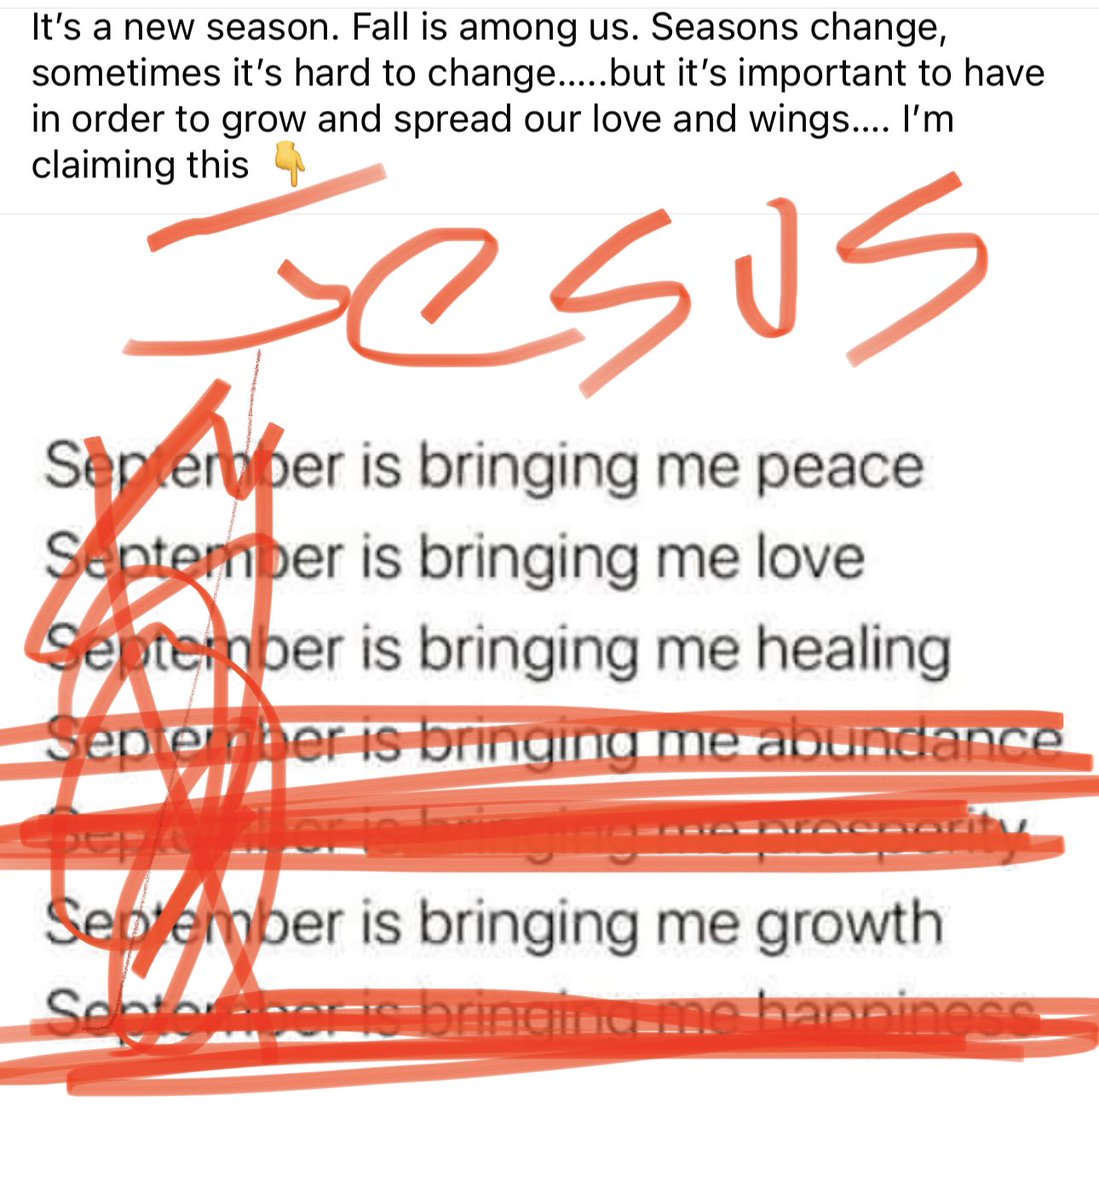 My sister cracks me up  🤣 she sent this to me this morning after she fixed it.

#JesusIsTheAnswer
#OnlyJesus
#JesusLovesYou
#JesusSaves